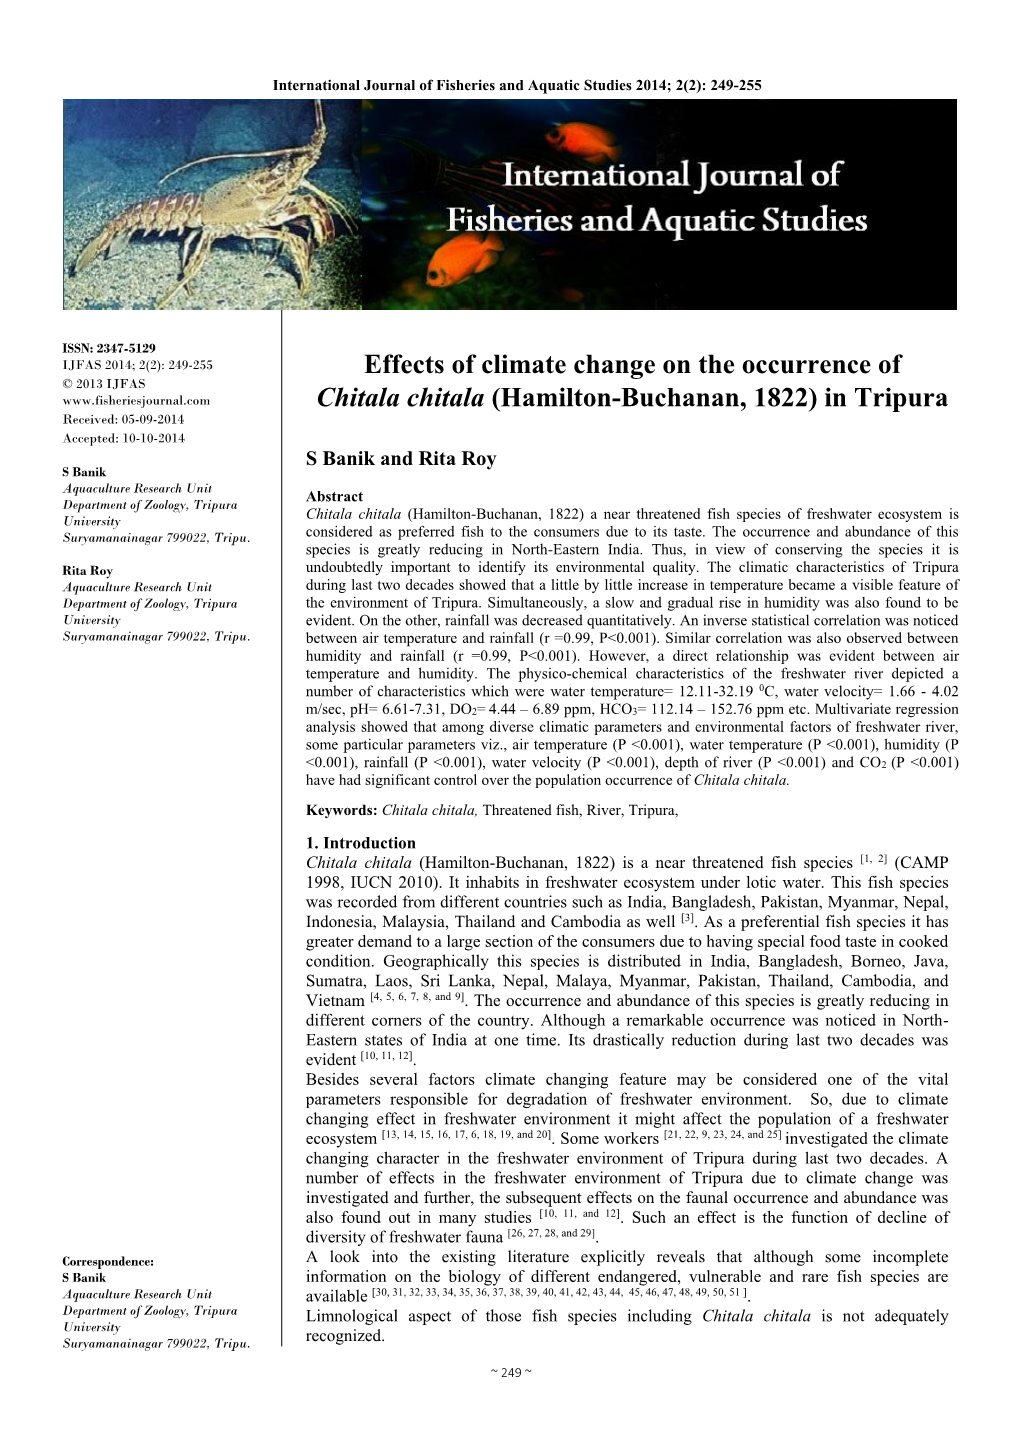 Effects of Climate Change on the Occurrence of Chitala Chitala